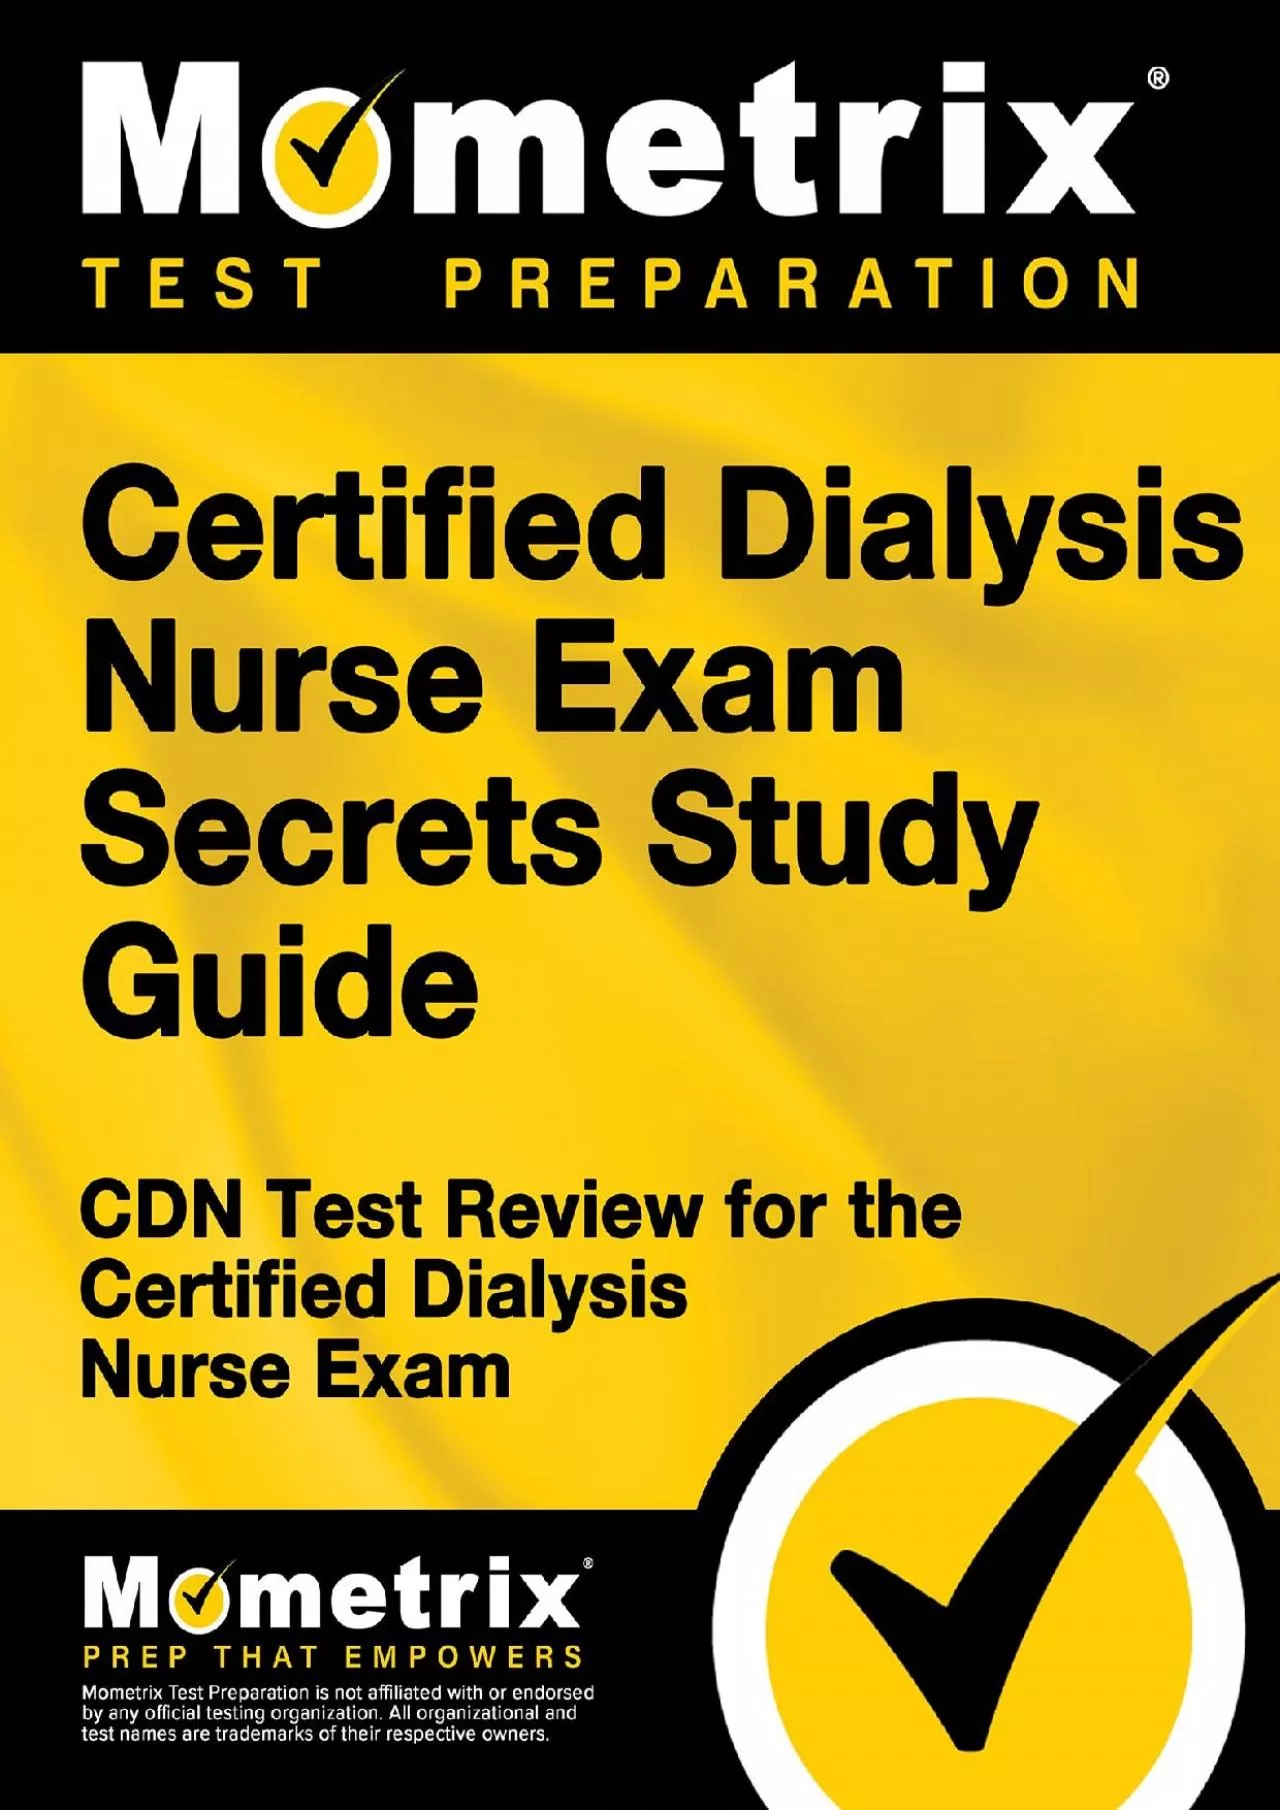 [EBOOK] Certified Dialysis Nurse Exam Secrets Study Guide: CDN Test Review for the Certified